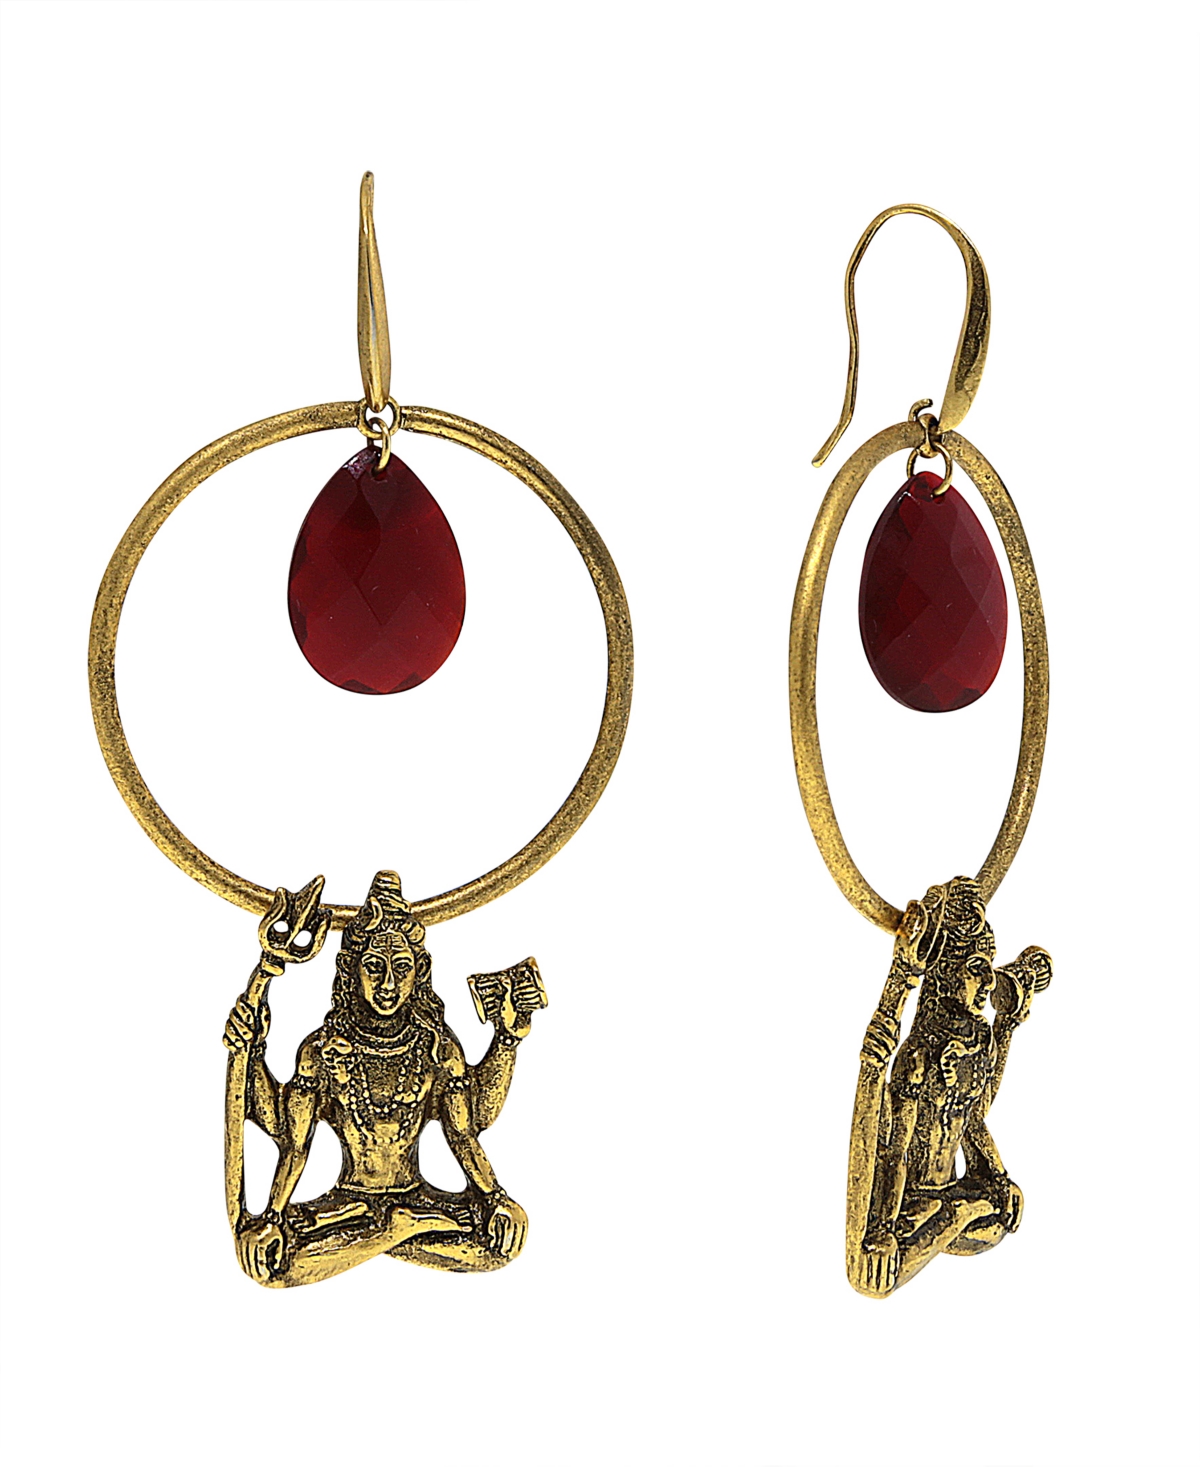 1928 T.r.u. By  Goddess "shiva" 14 K Gold Dipped Hoop Earring With Briolette Center In Red